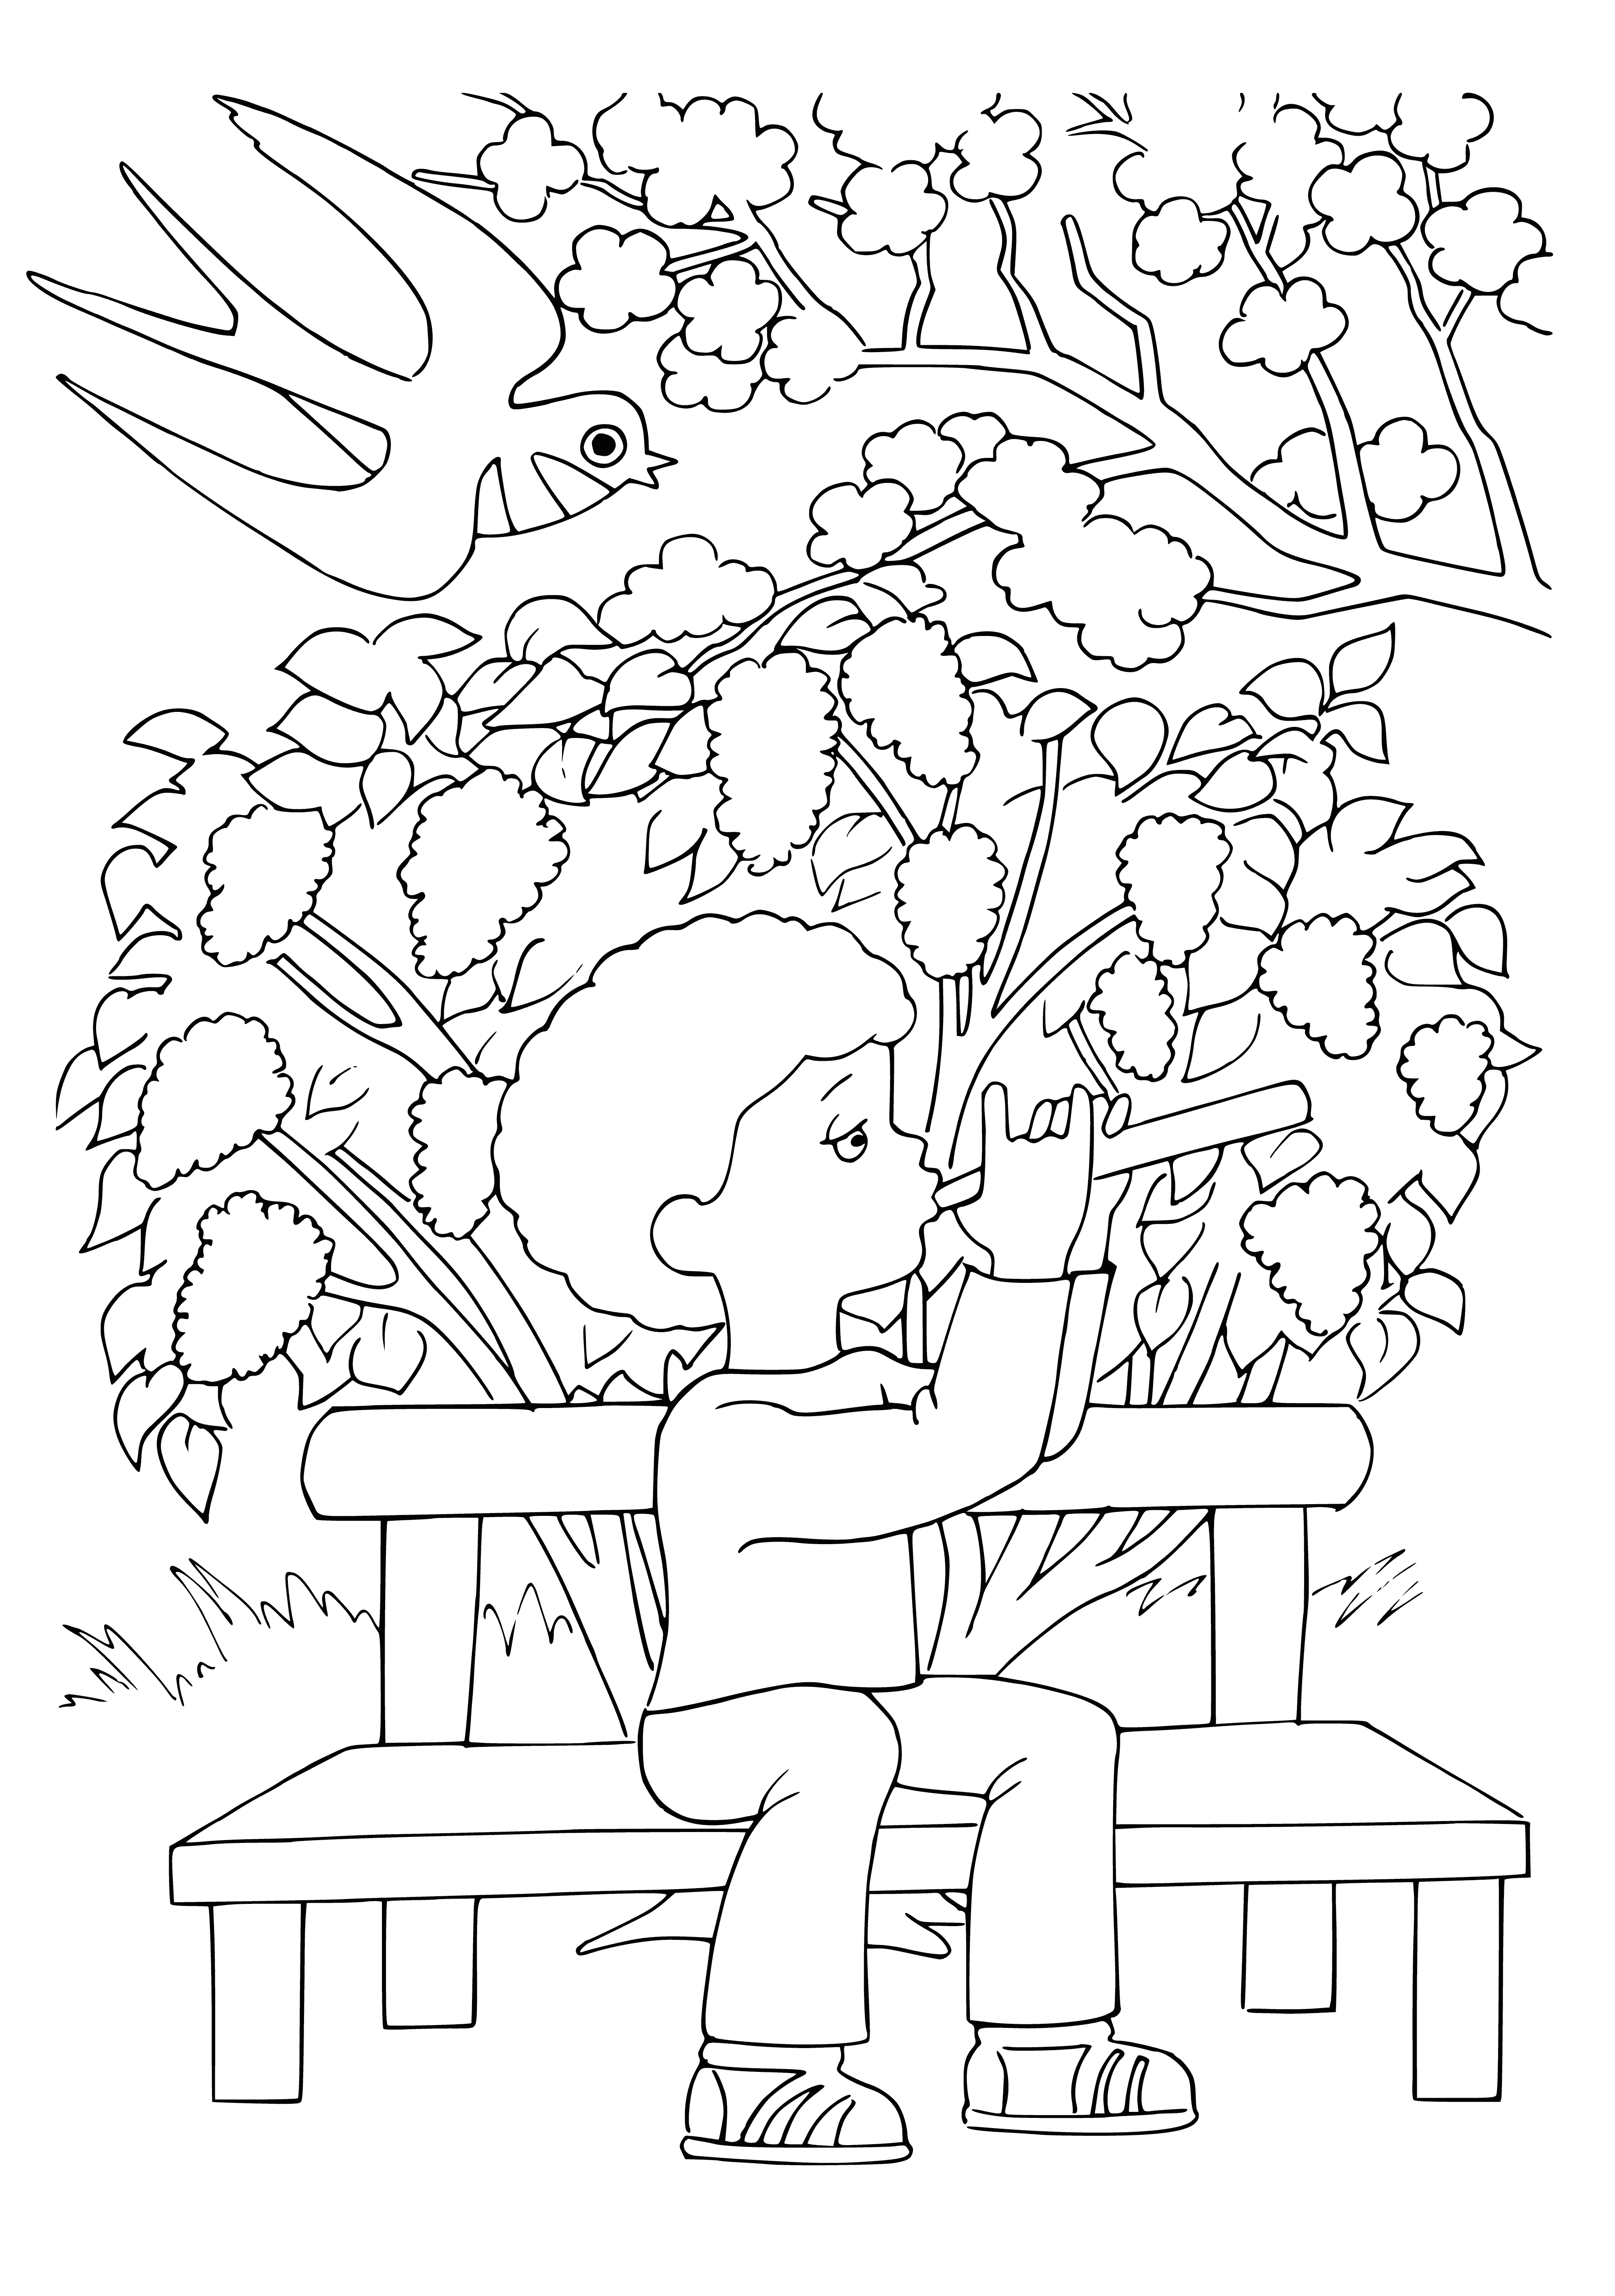 coloring page: Lilac bush in bloom with deep purple blooms, green leaves and light blue background.